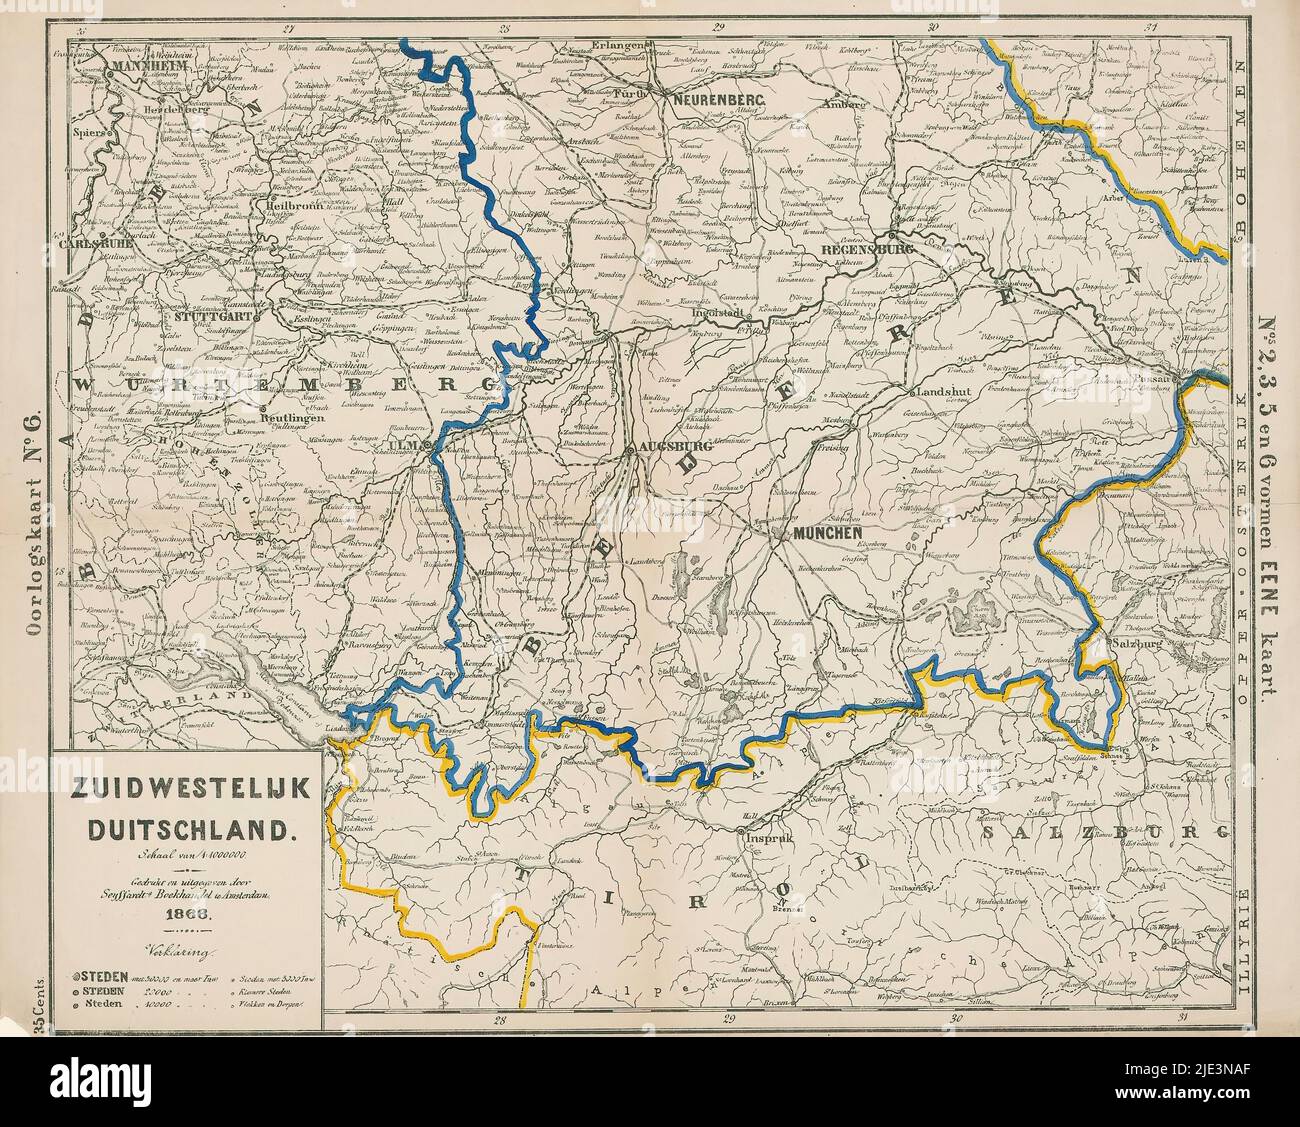 Map of Southwestern Germany, Southwestern Germany (title on object), Left side numbered: 3., print maker: anonymous, printer: boekhandel te Amsterdam Seijffardt, (mentioned on object), publisher: boekhandel te Amsterdam Seijffardt, (mentioned on object), Amsterdam, 1866, paper, height 346 mm × width 433 mm Stock Photo